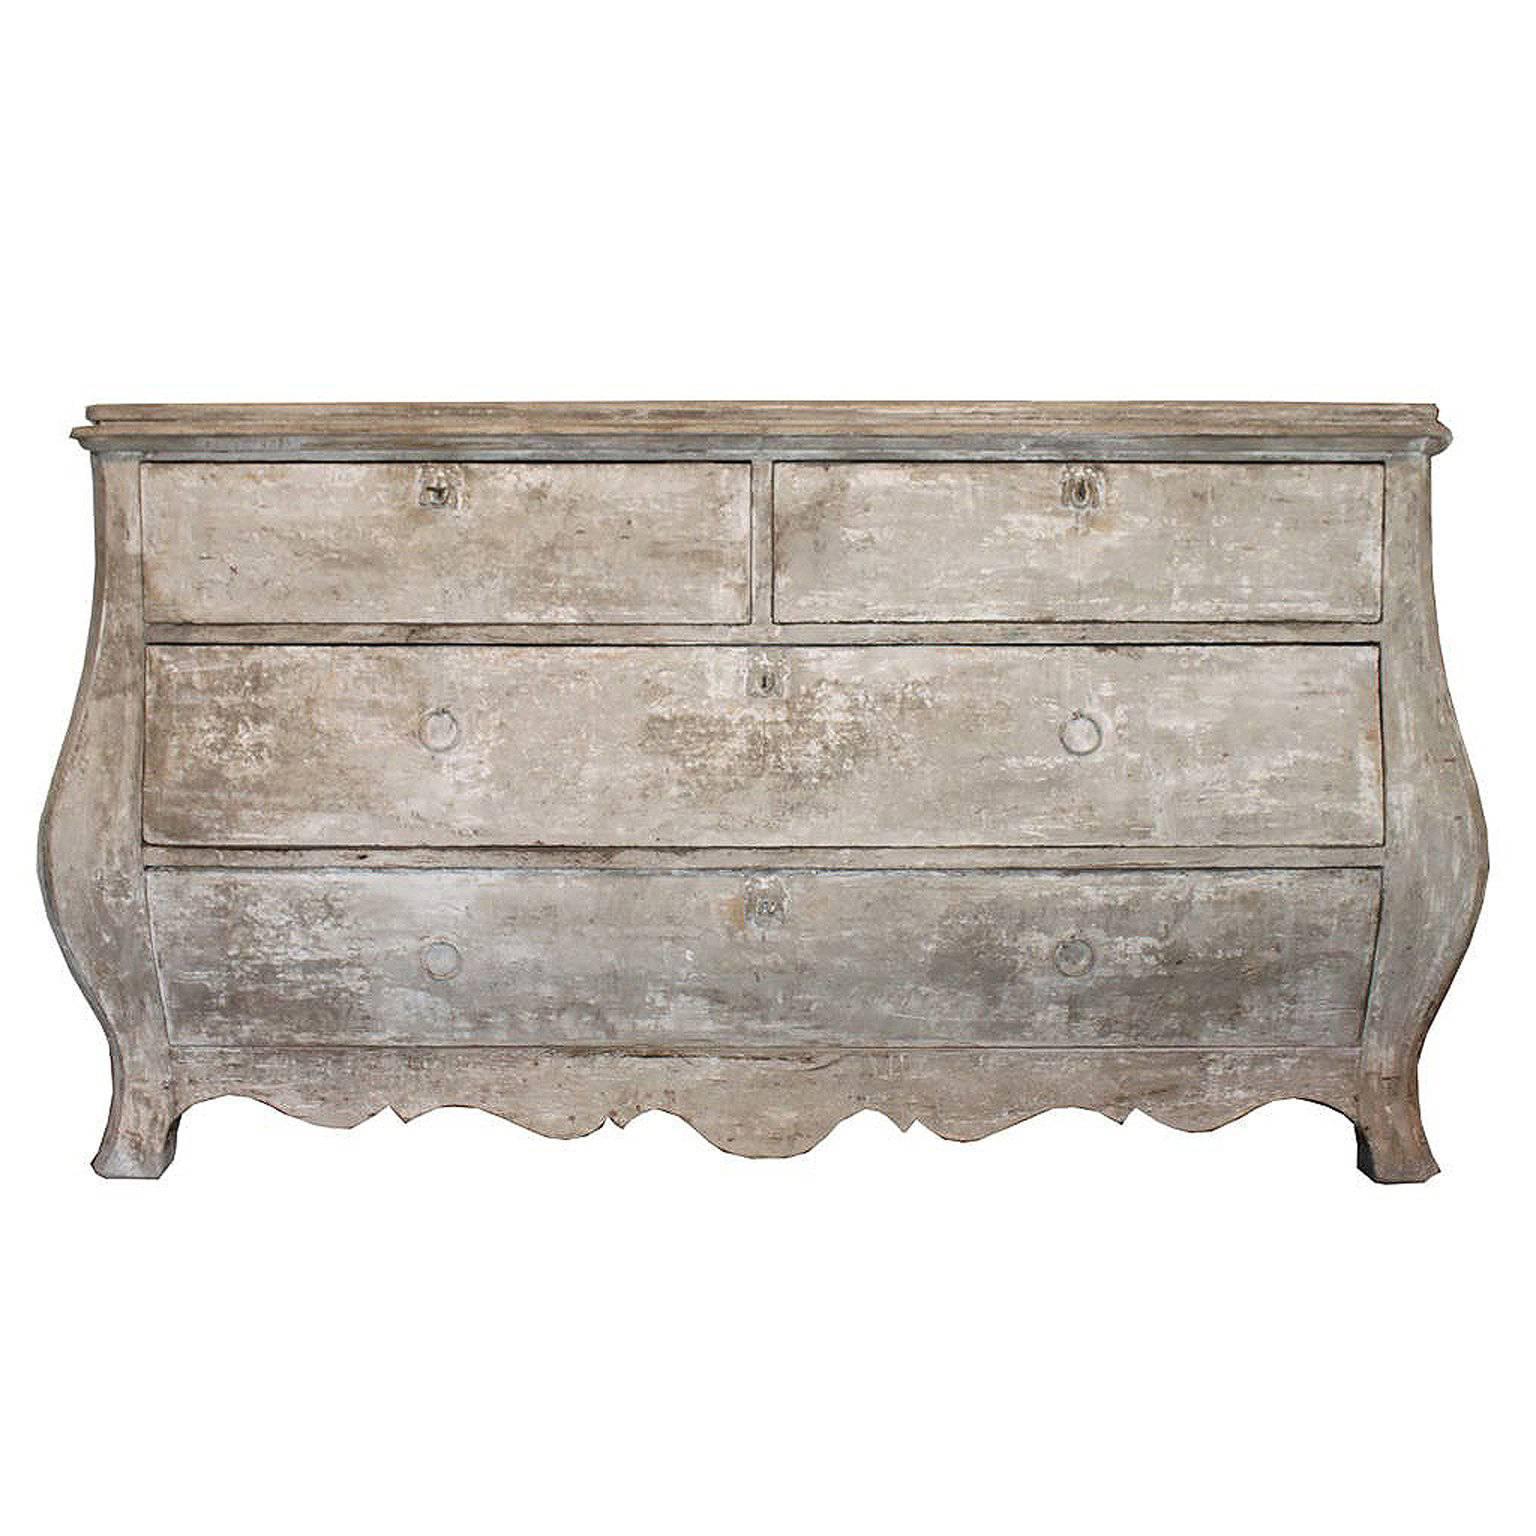 French Late 19th Century Dutch Style Painted Wood Bombé Chest with Four Drawers